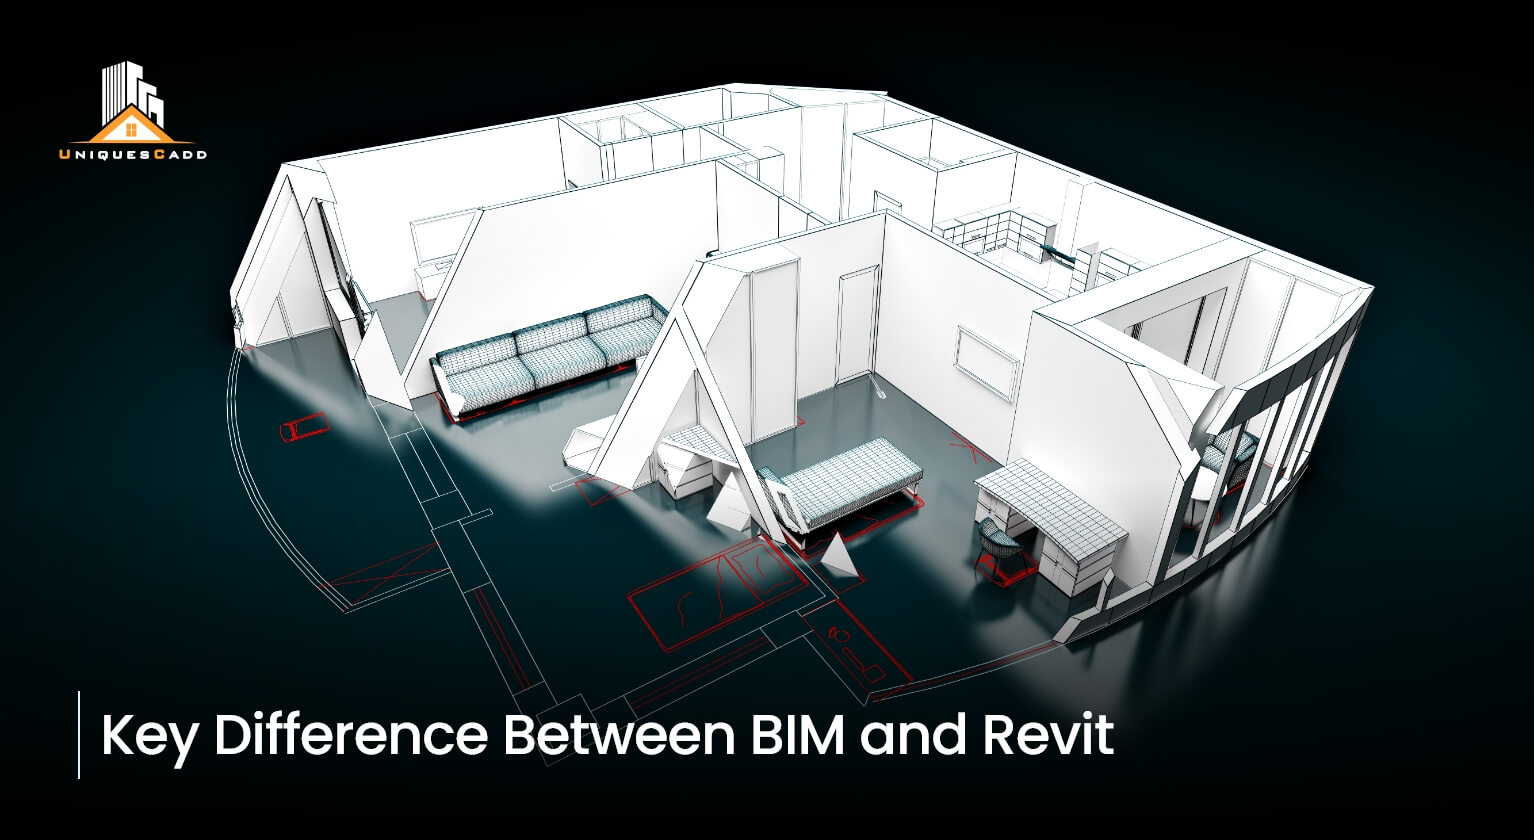 Key Difference Between BIM and Revit